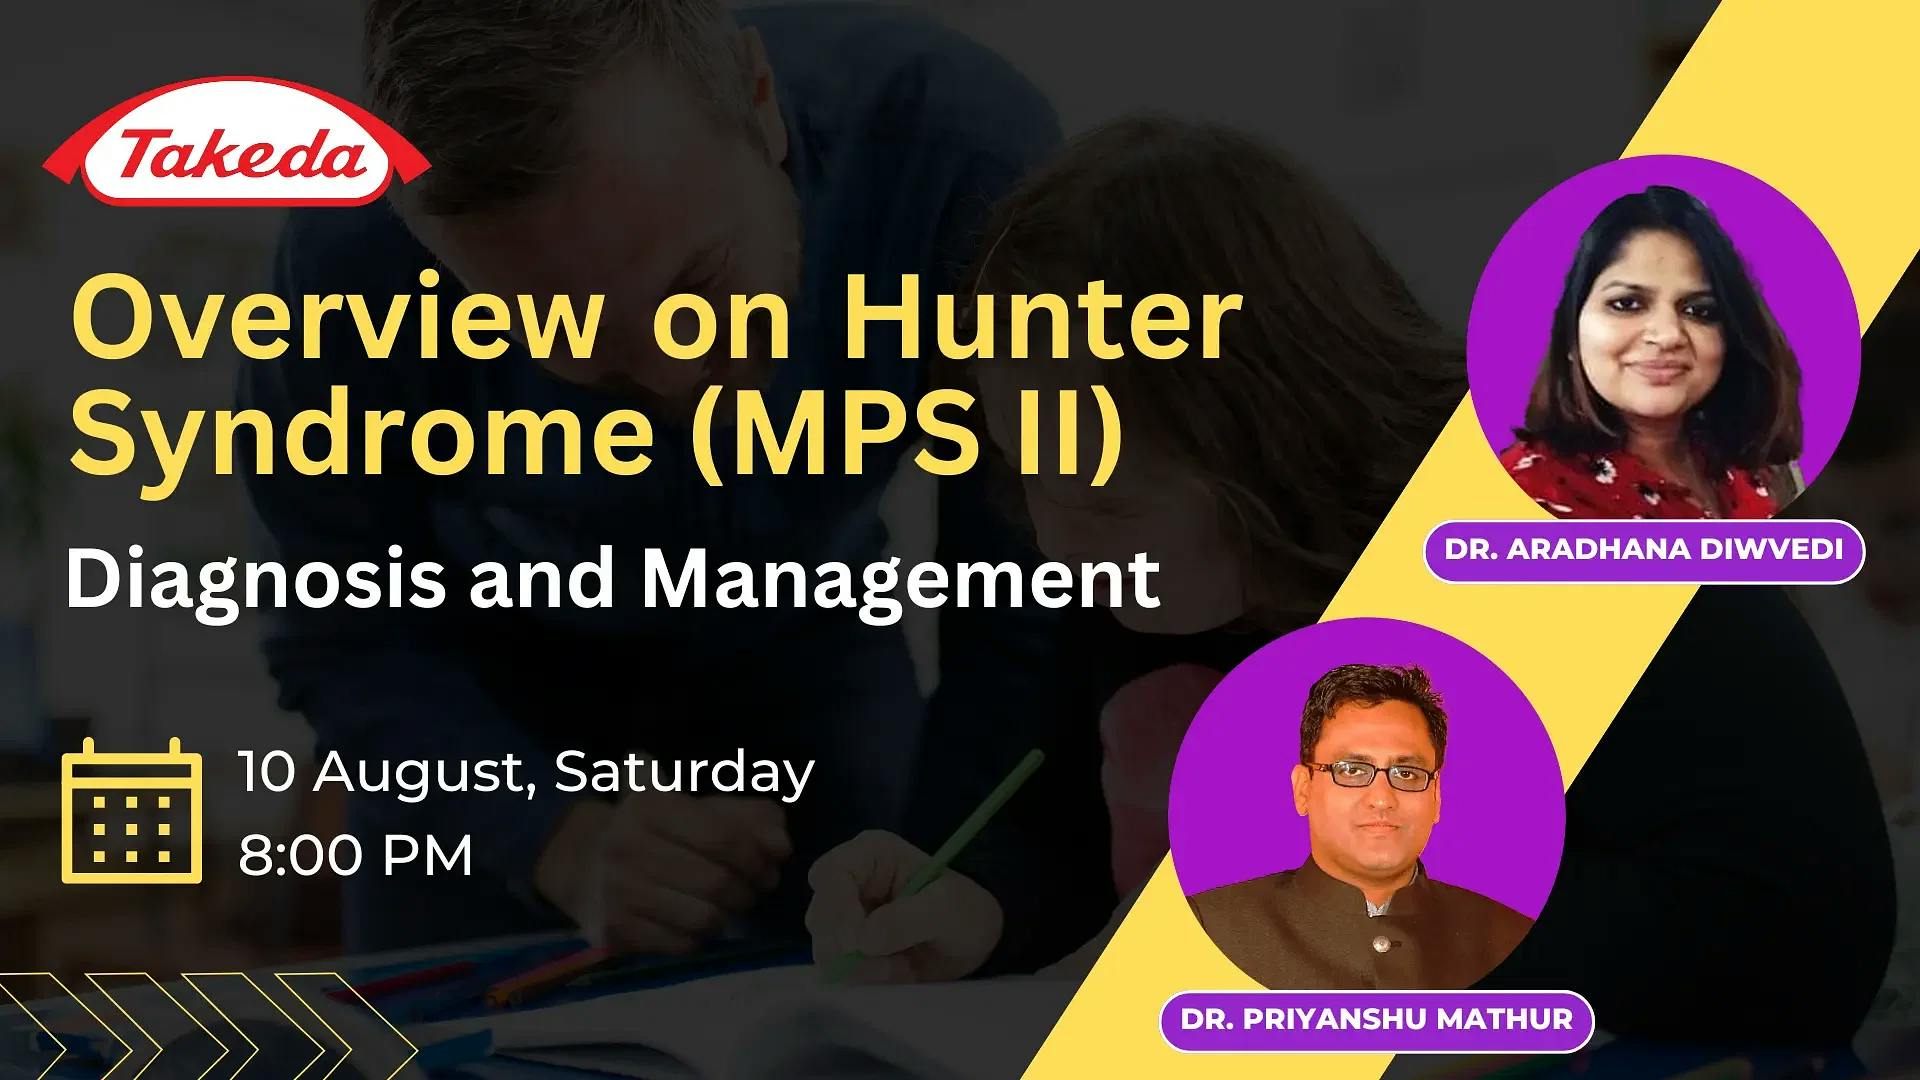 Overview on Hunter Syndrome (MPS II) – Diagnosis and Management